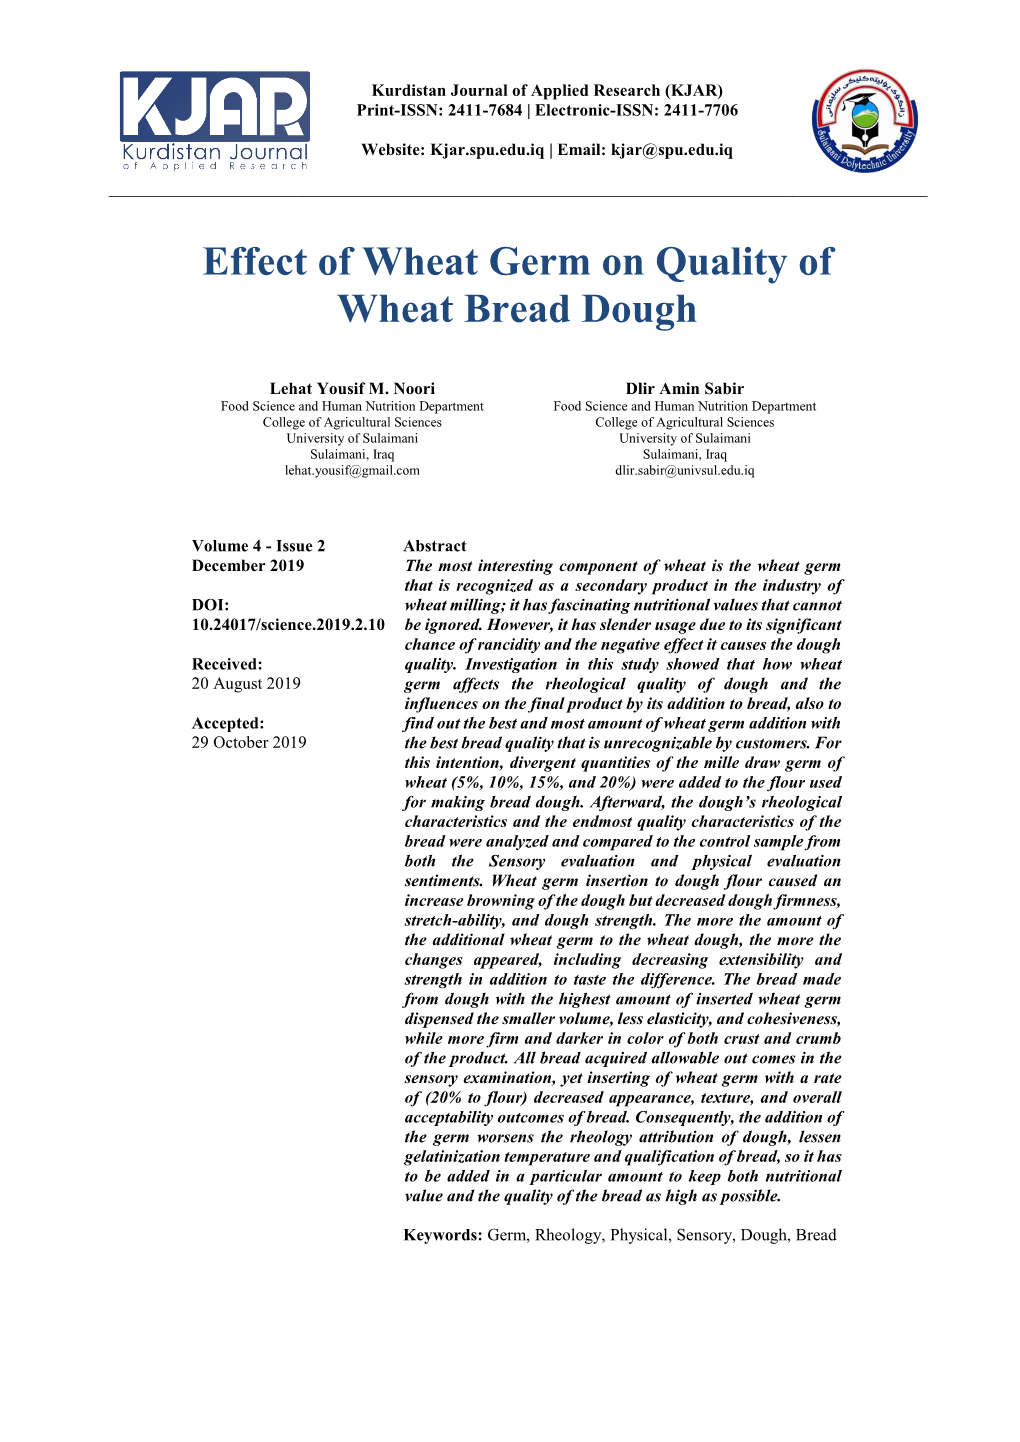 Effect of Wheat Germ on Quality of Wheat Bread Dough